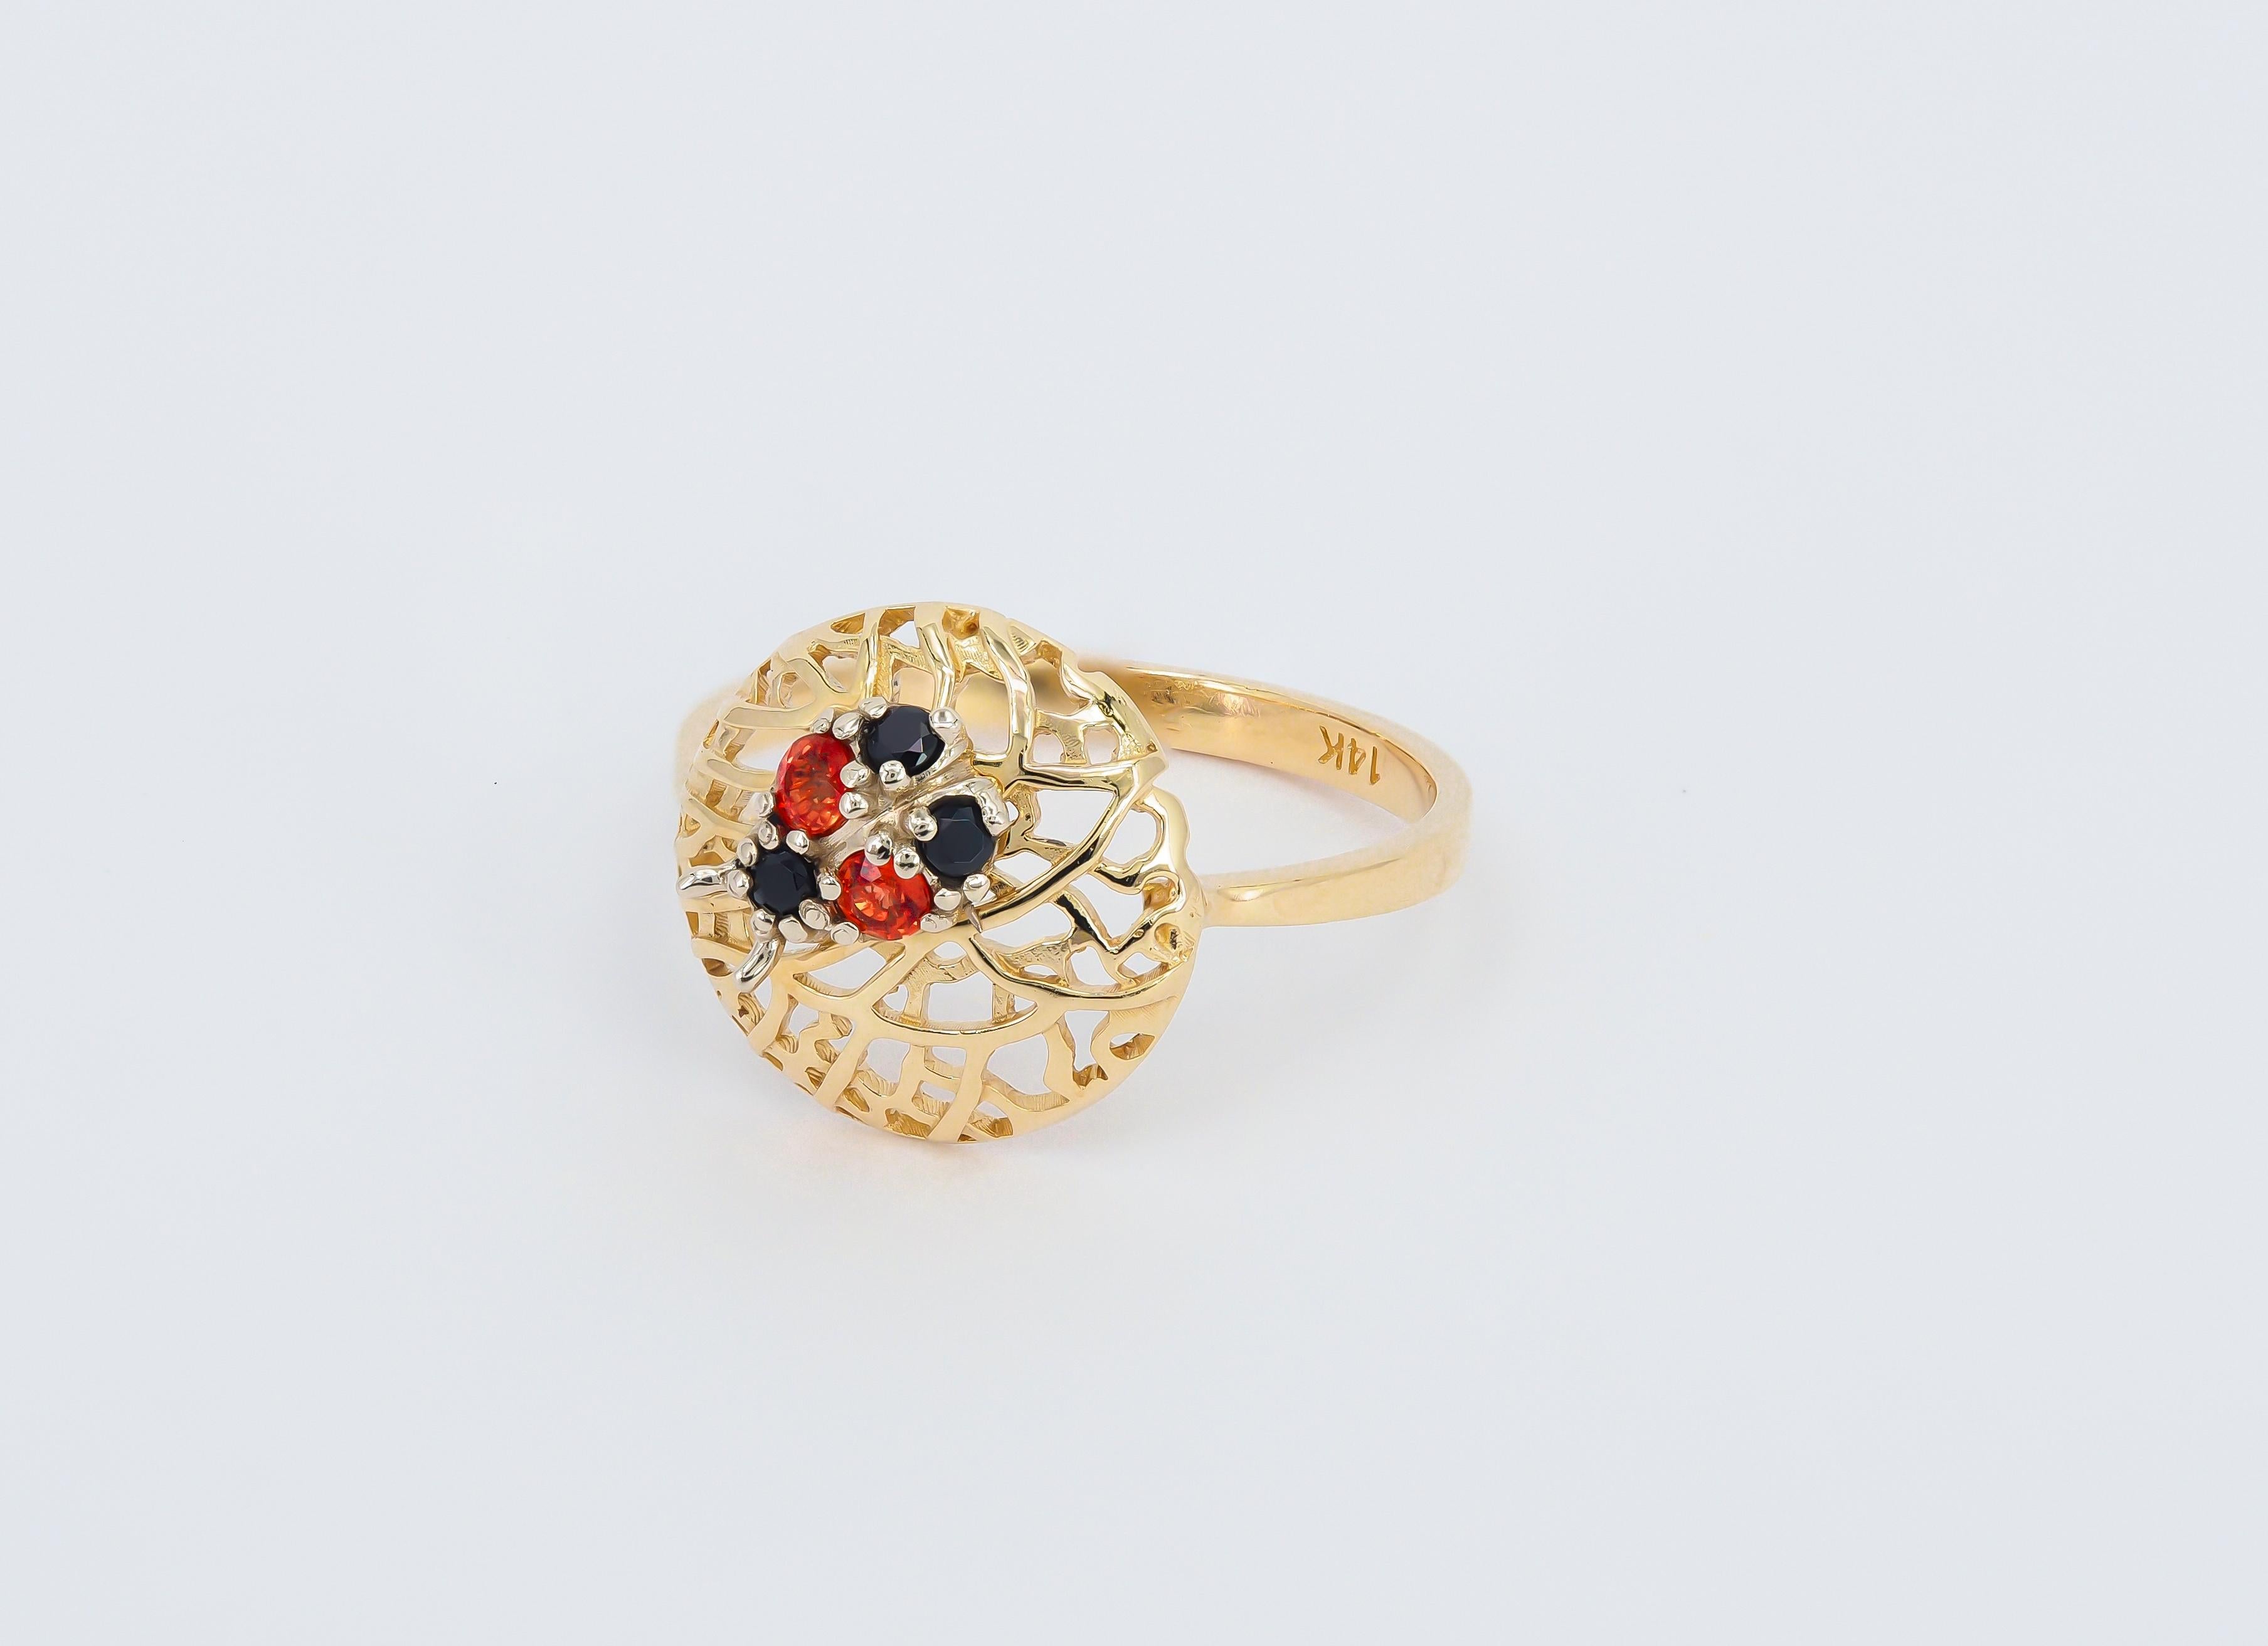 Round Cut Ladybug ring with colored gemstones.  For Sale